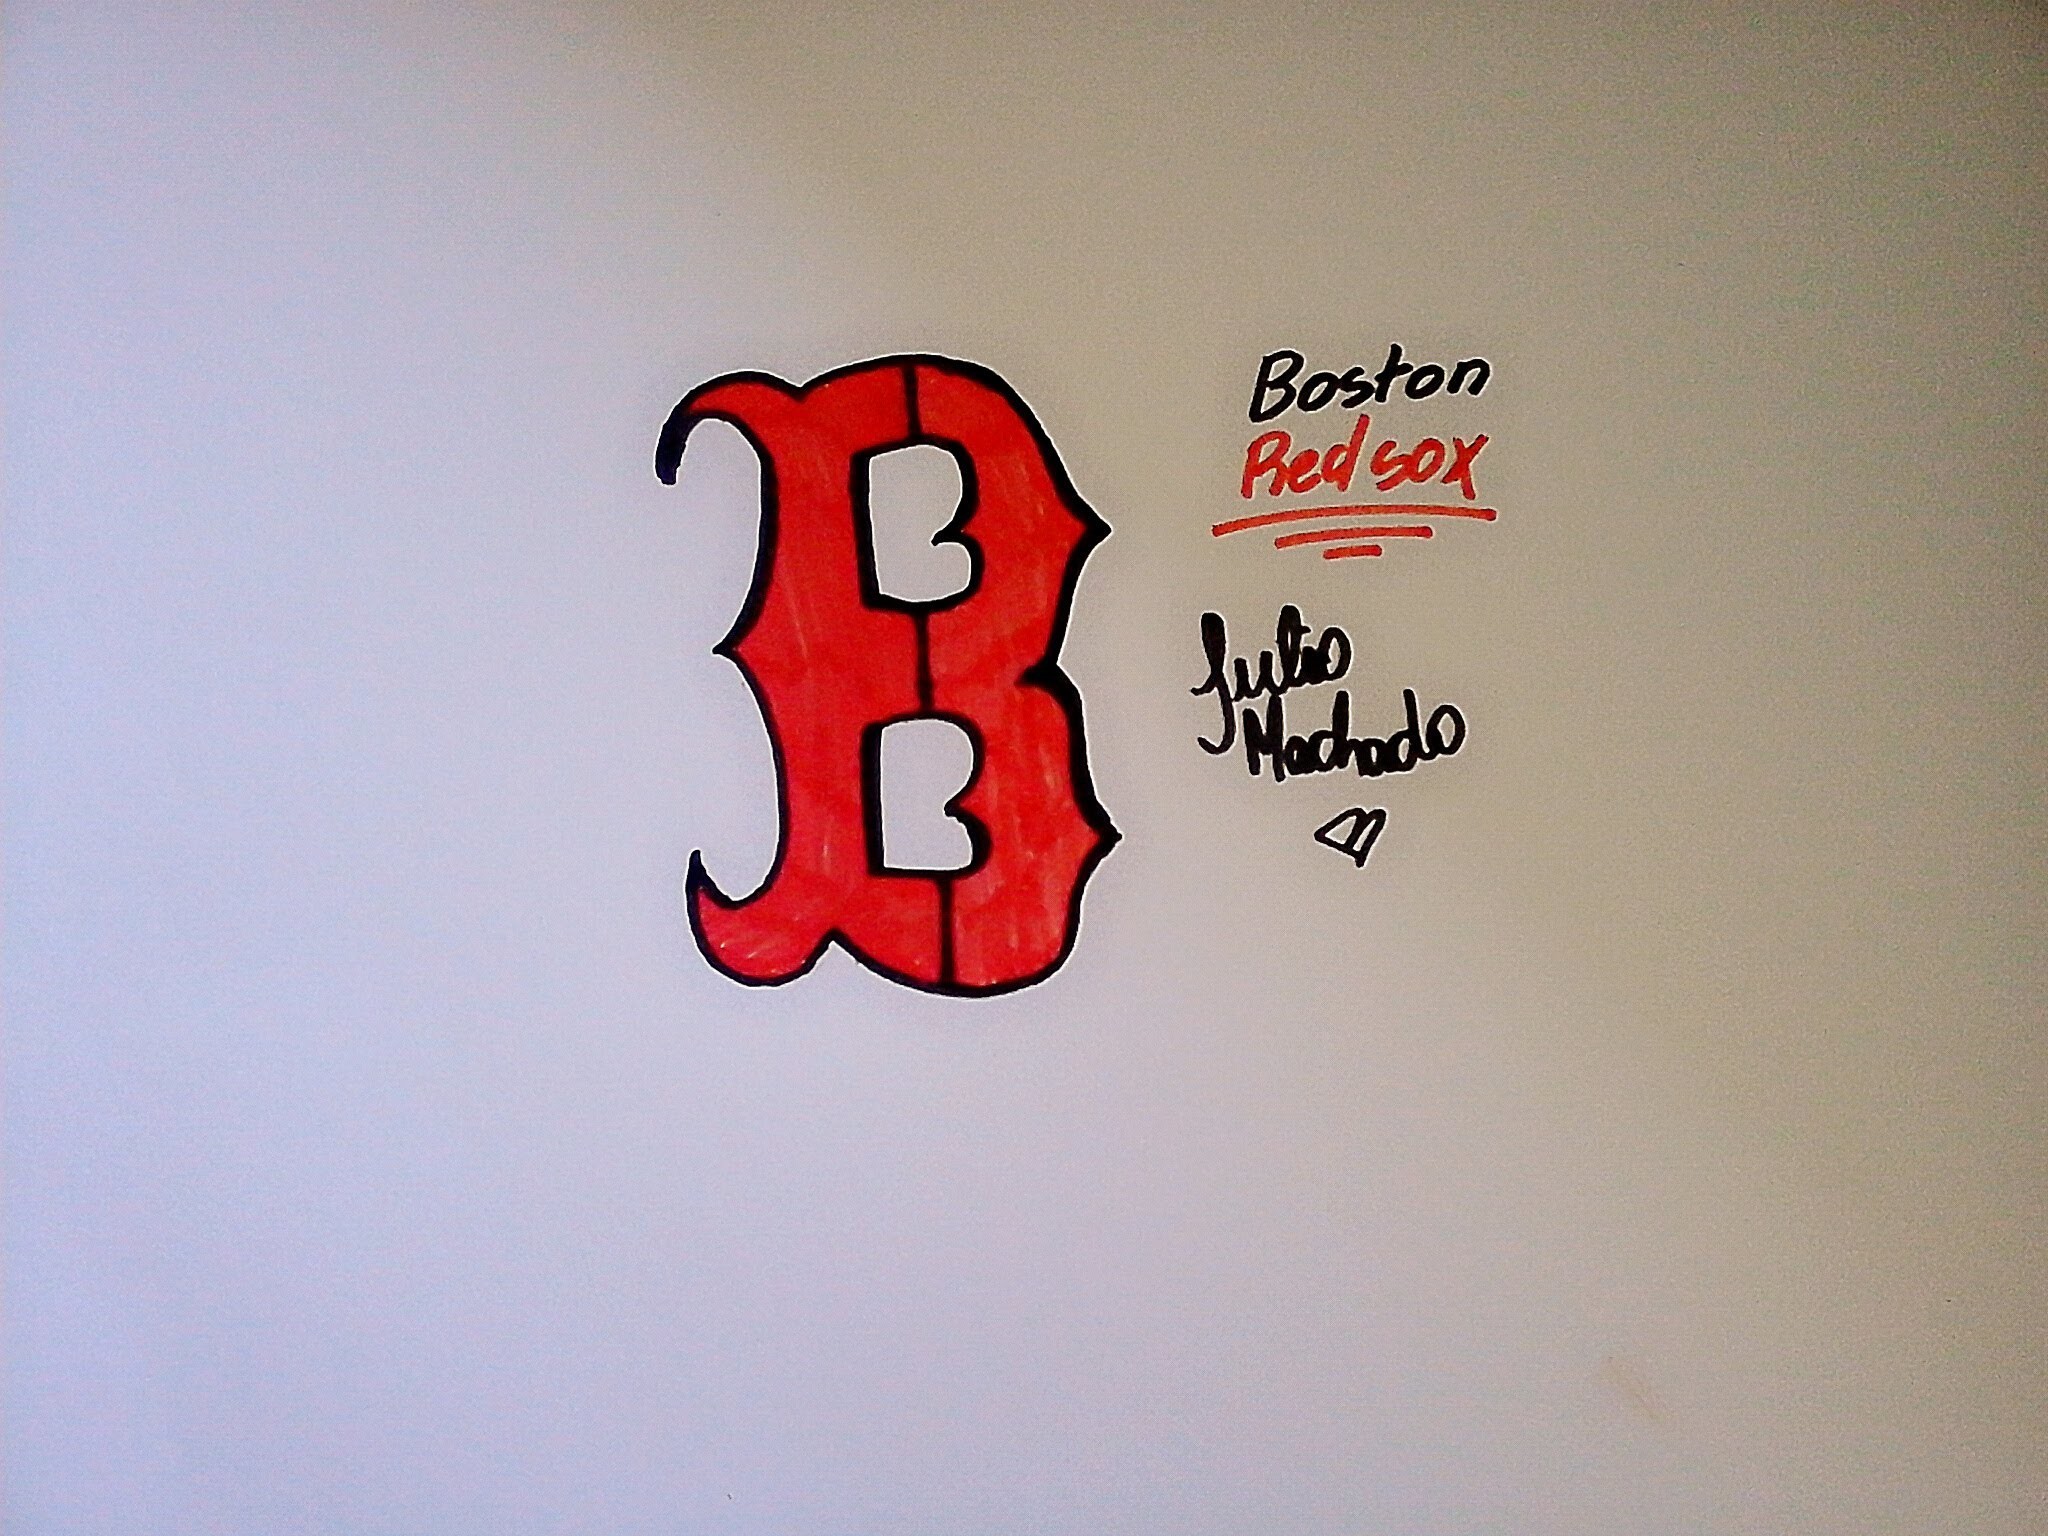 2048x1536 1920x1200 Boston Red Sox Logo Wallpapers - Wallpaper Cave